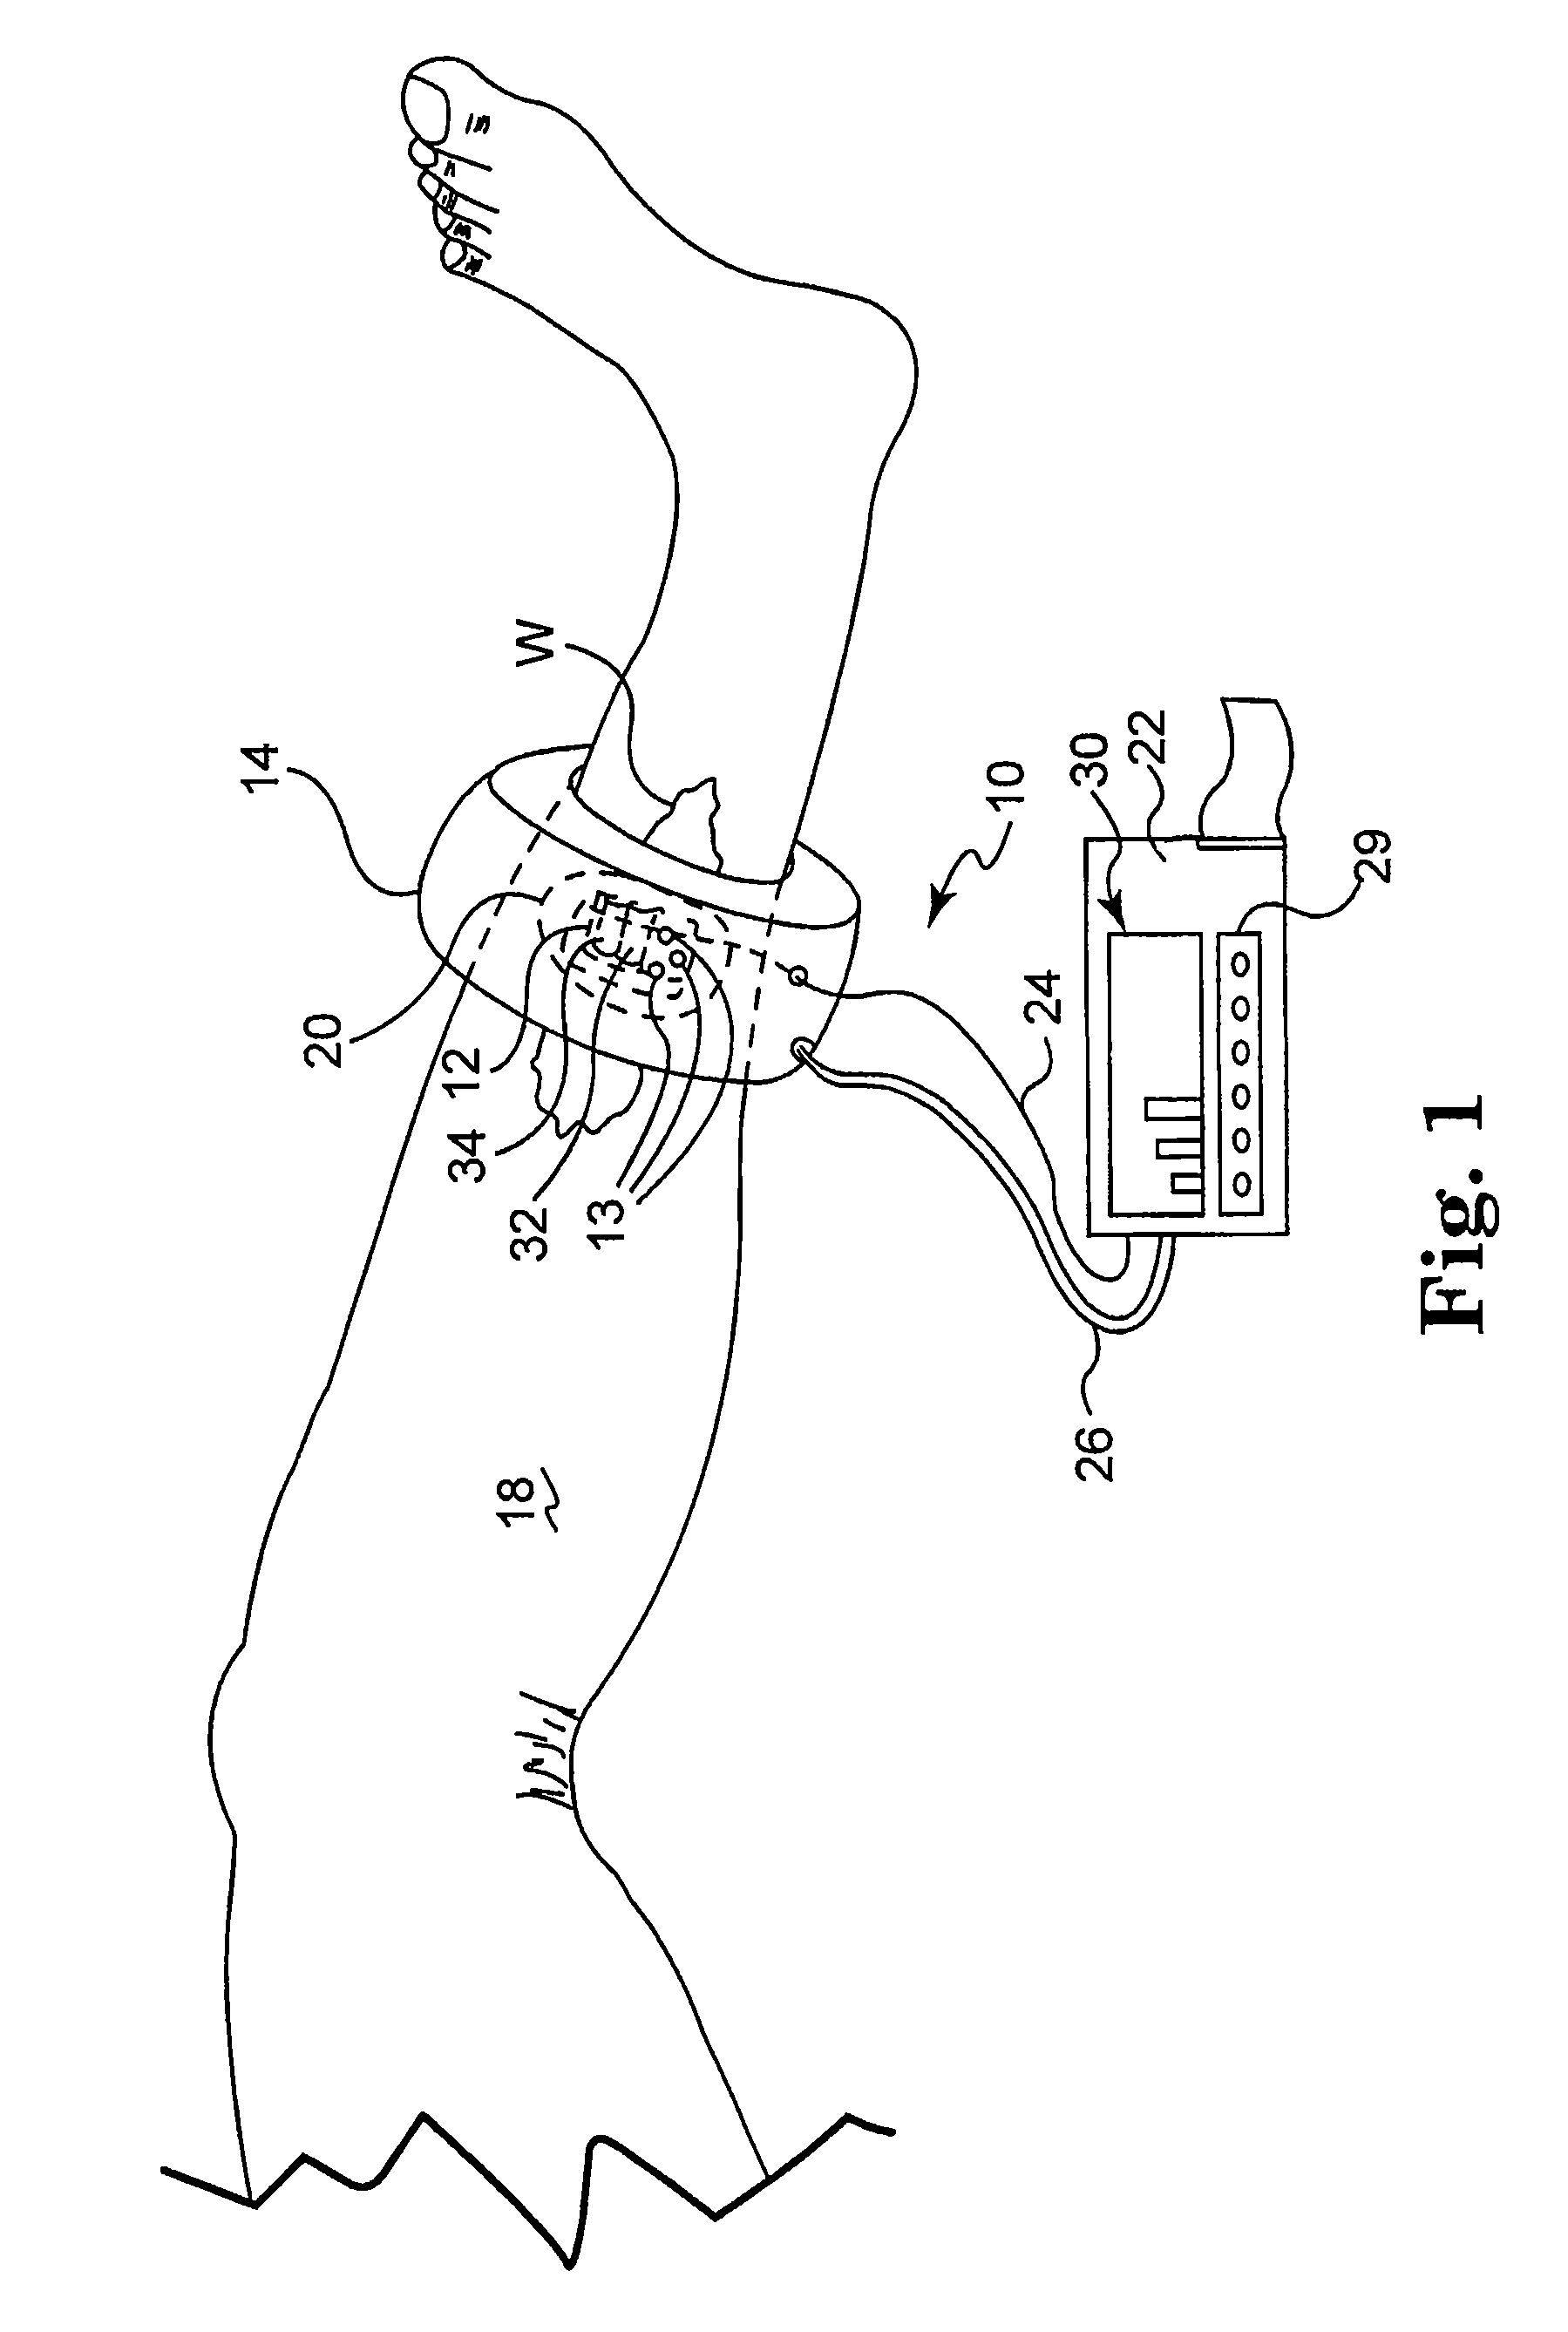 System and method for assessing capillary vitality